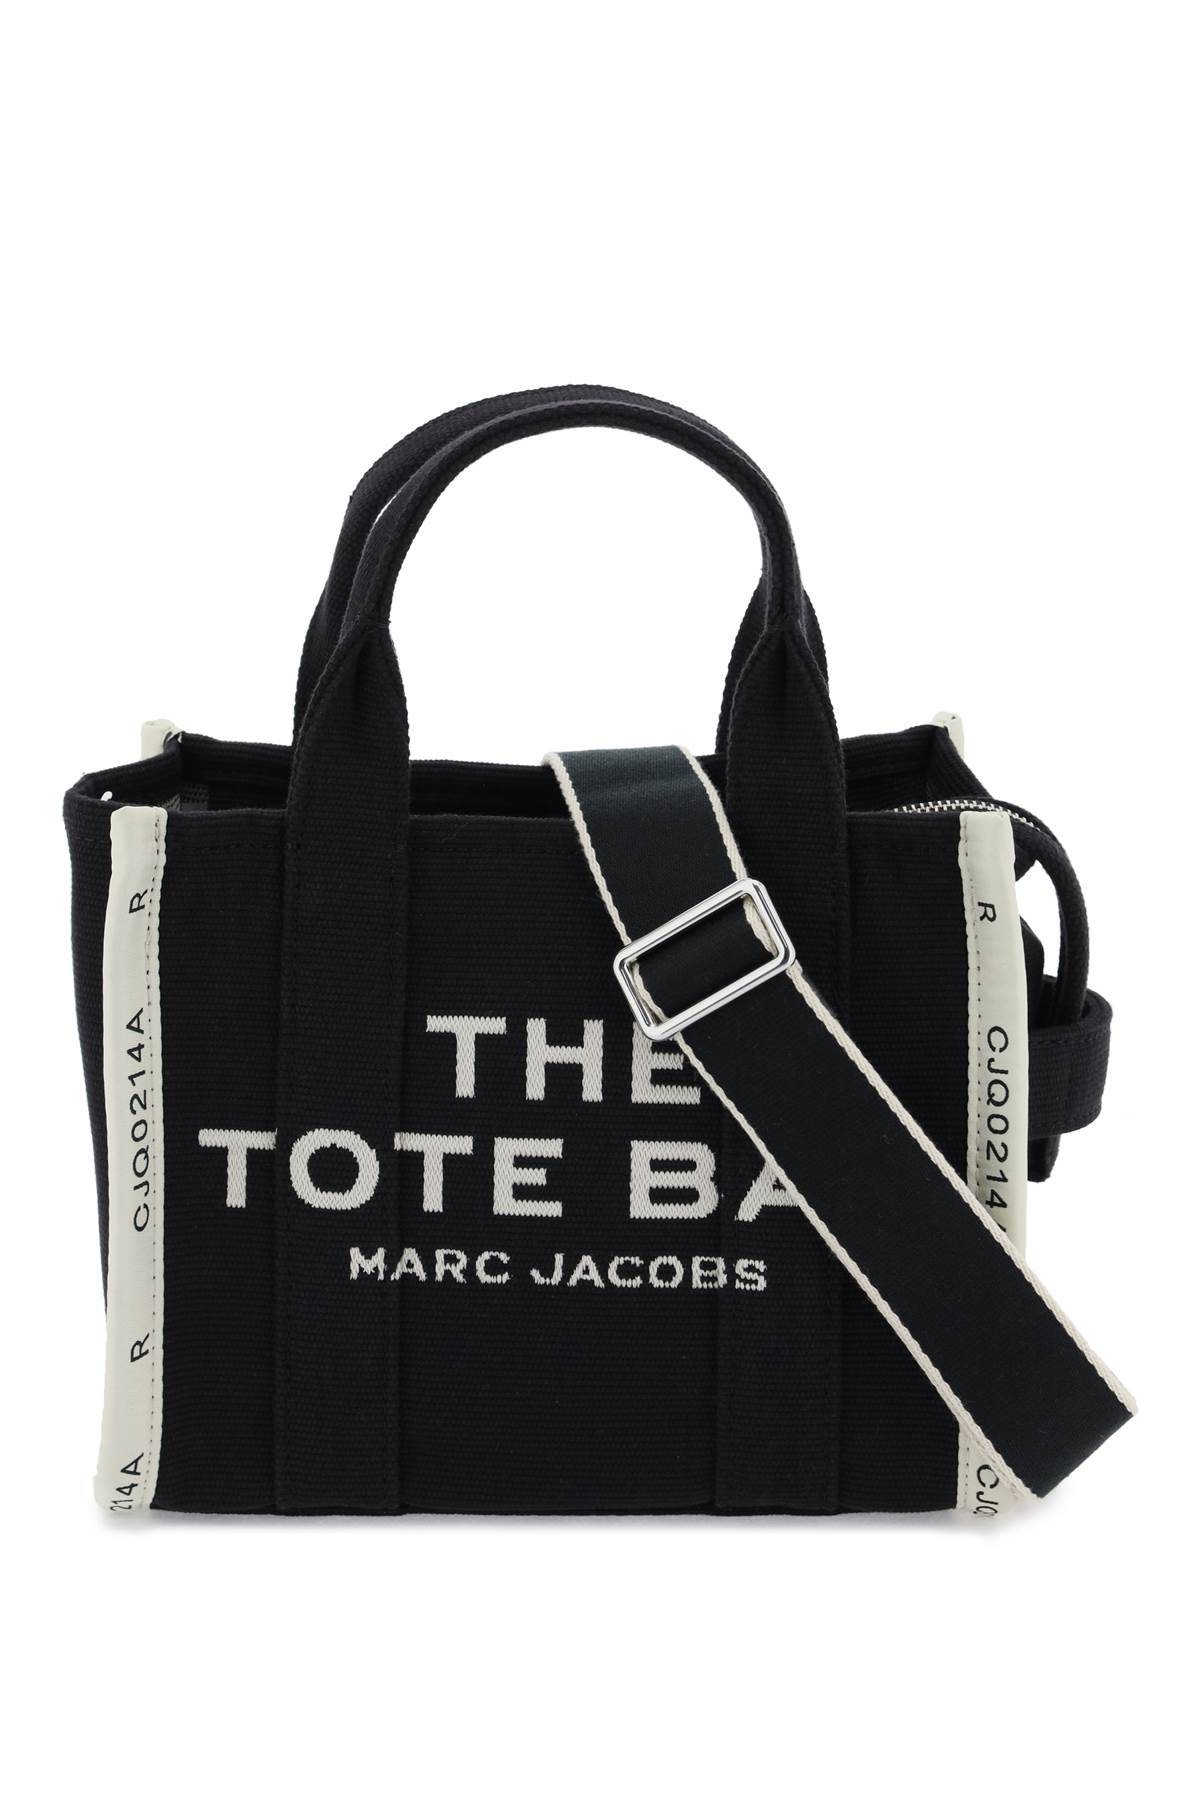 Marc Jacobs MARC JACOBS the jacquard small tote bag